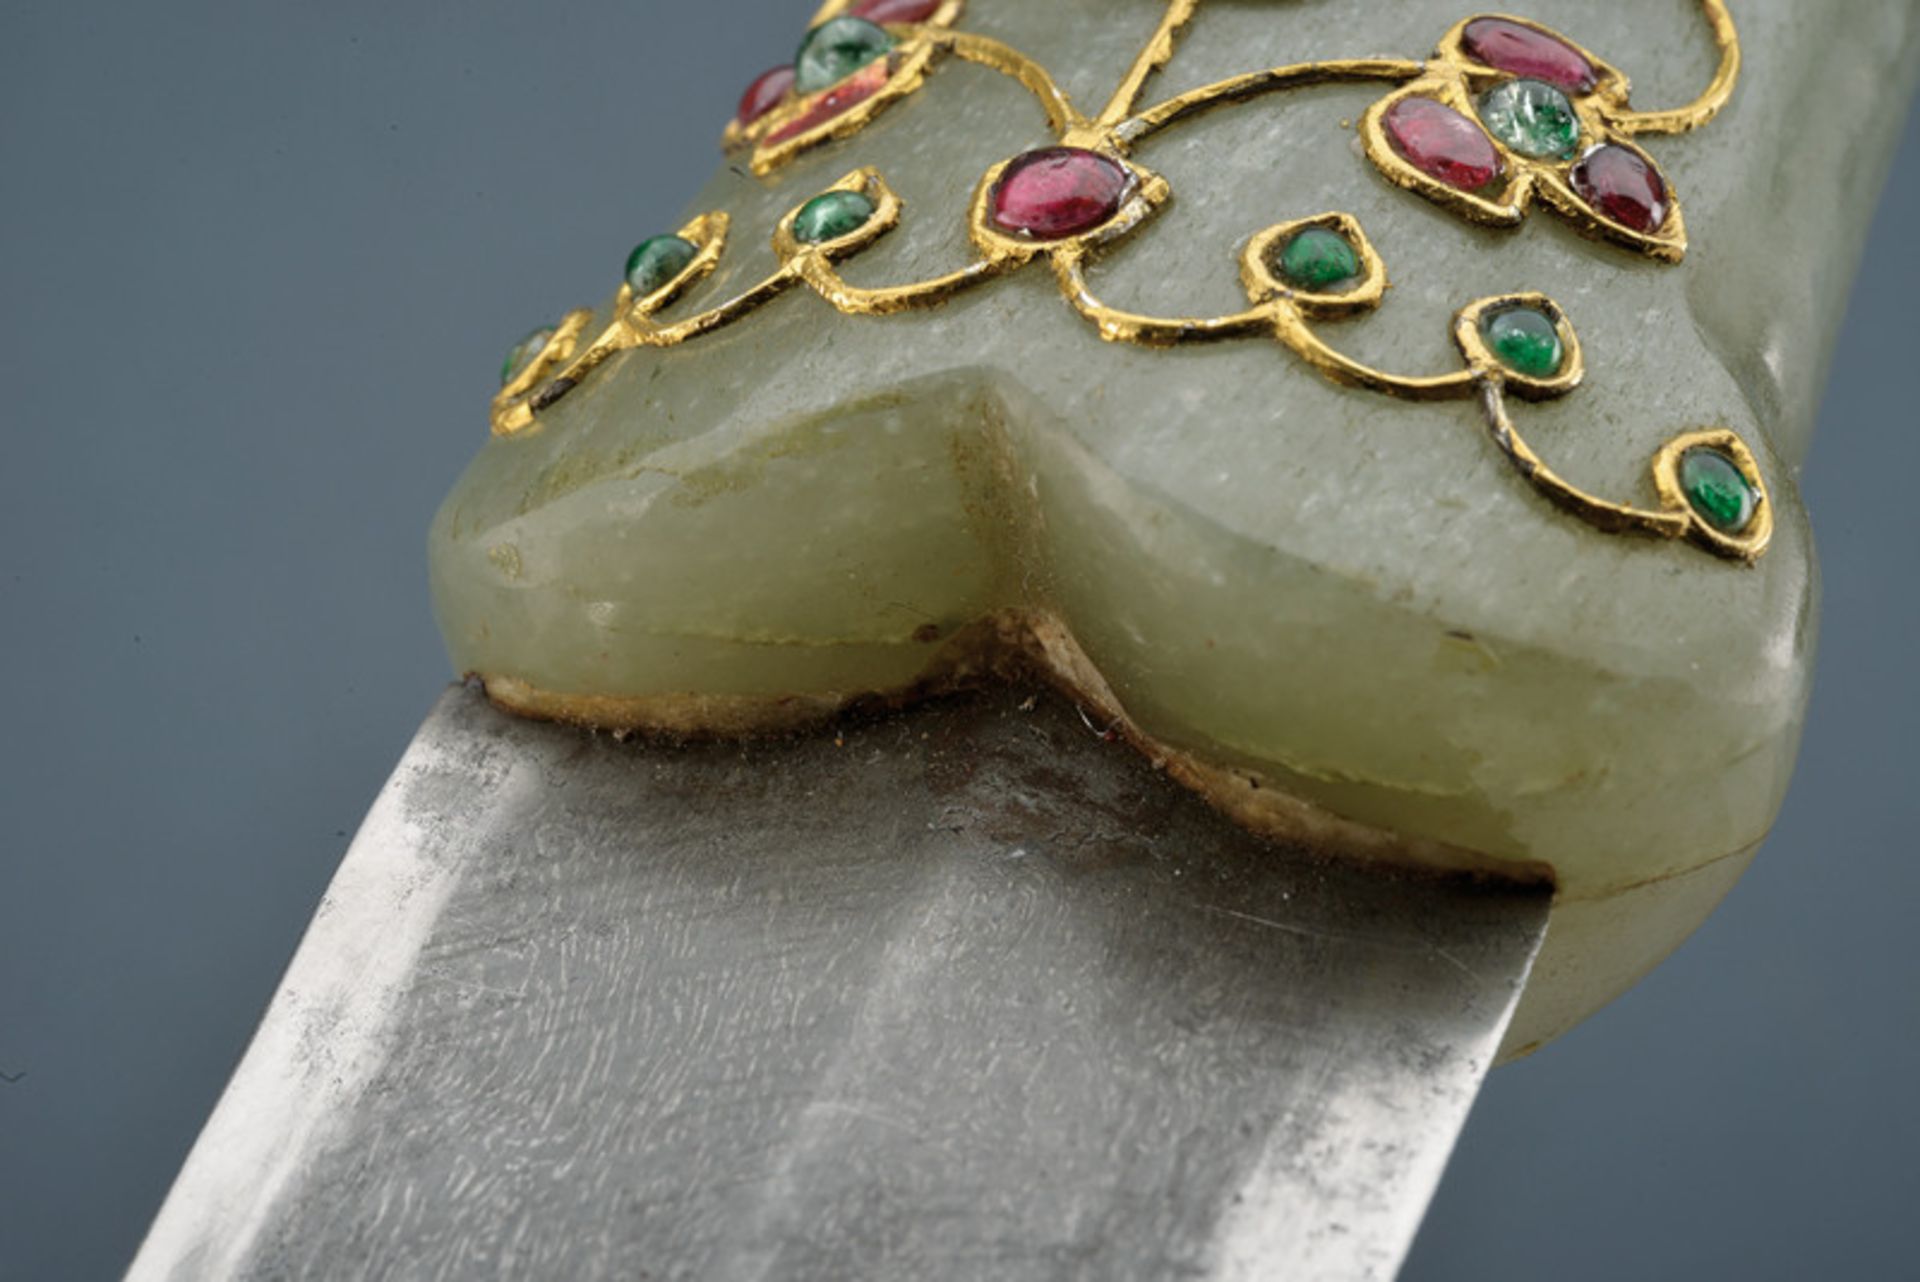 A jade hilted dagger decorated with stones and gold - Bild 3 aus 9